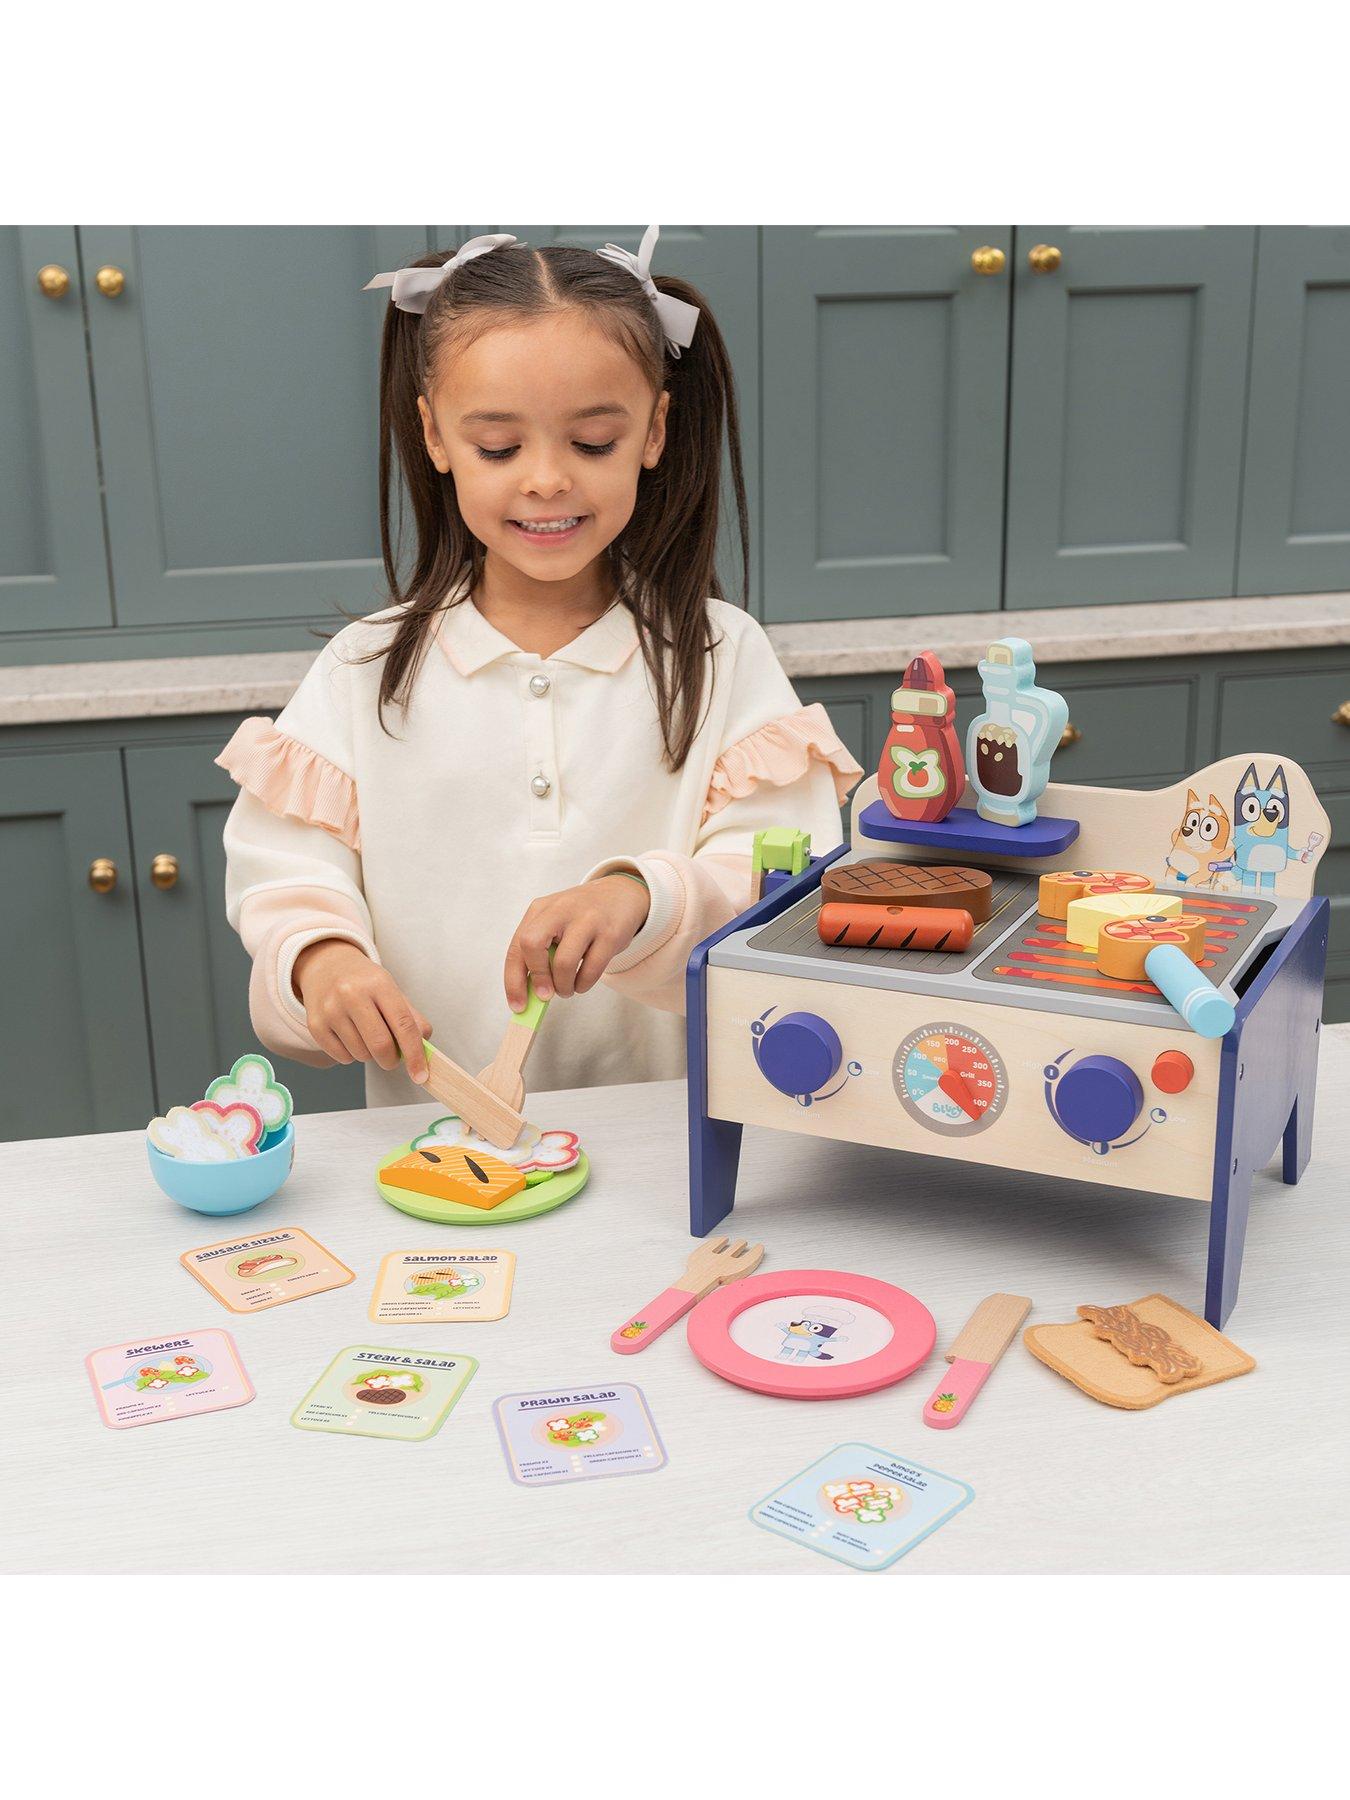 Play Kitchen Playset for Kids, Toy Kitchen Appliances Includes Blender,  Toaster, Mixer, Play Cutting Fruits & Learnning Cards, Pretend Play Gift  for 3